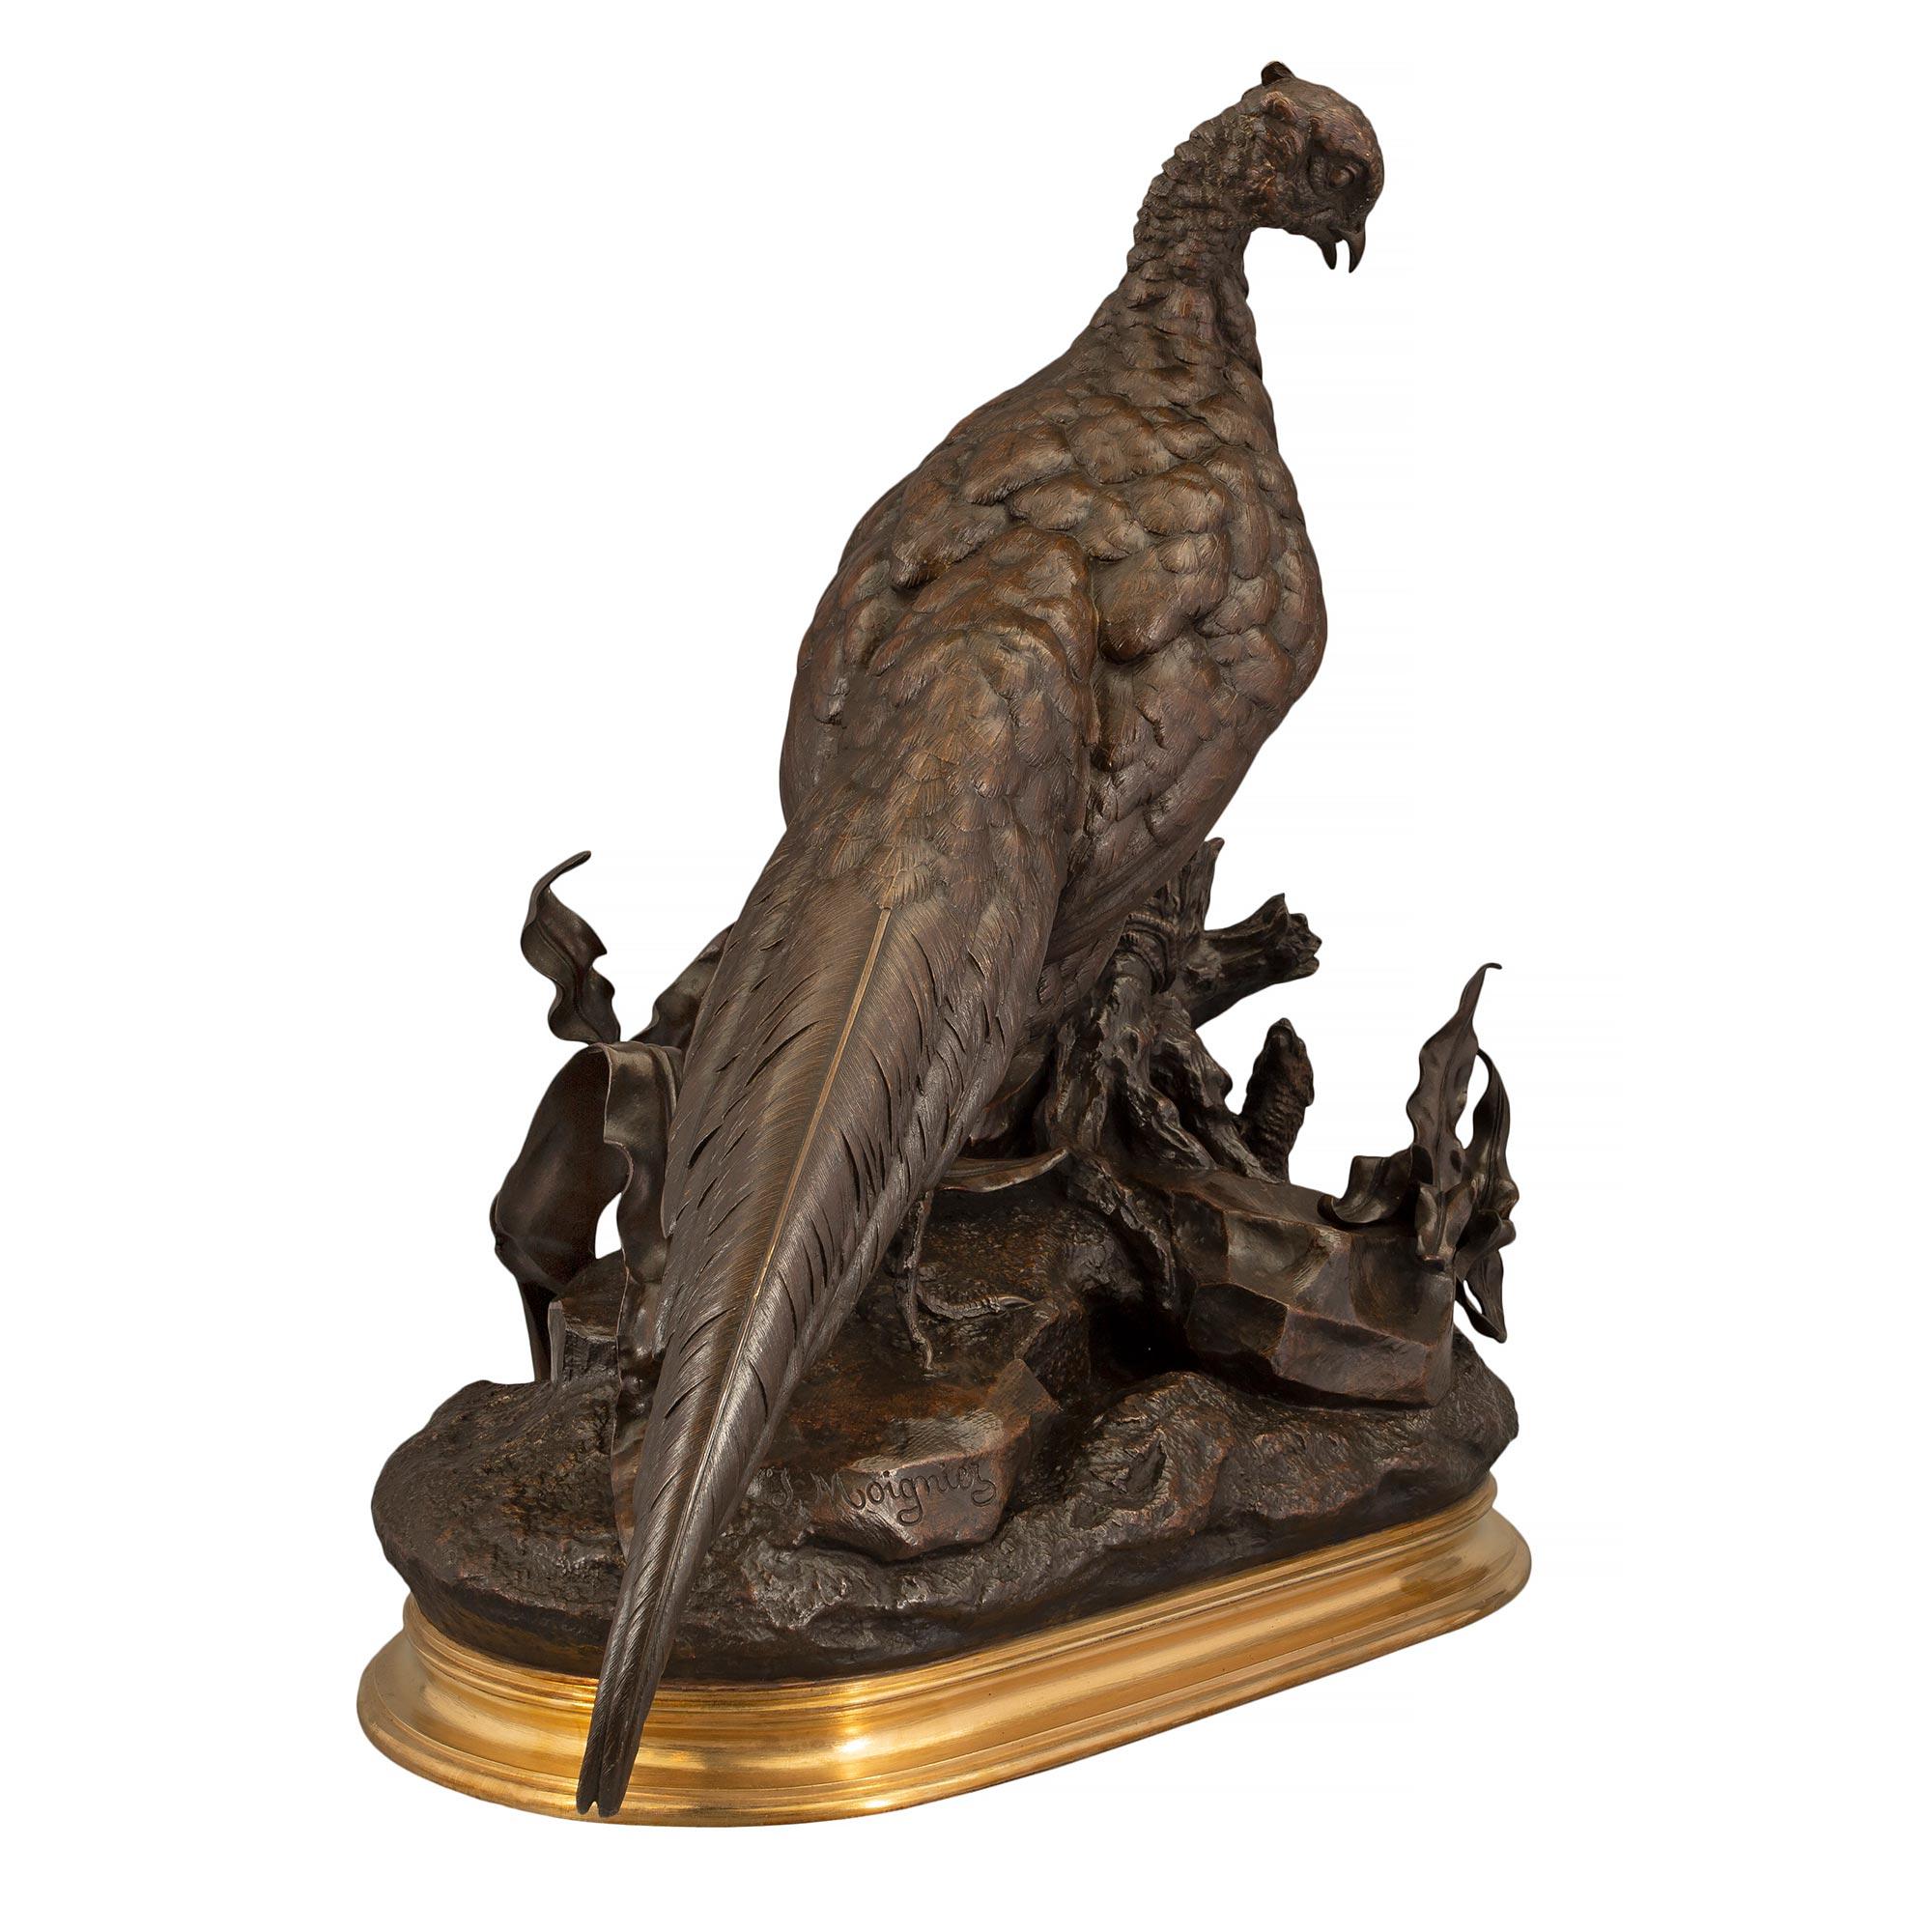 A stunning and large scale French 19th century patinated bronze and ormolu statue of a pheasant signed Jules Moigniez. The bronze is elevated above a mottled oval shaped ormolu base. The regal pheasant is stands proudly with one leg on a rock and